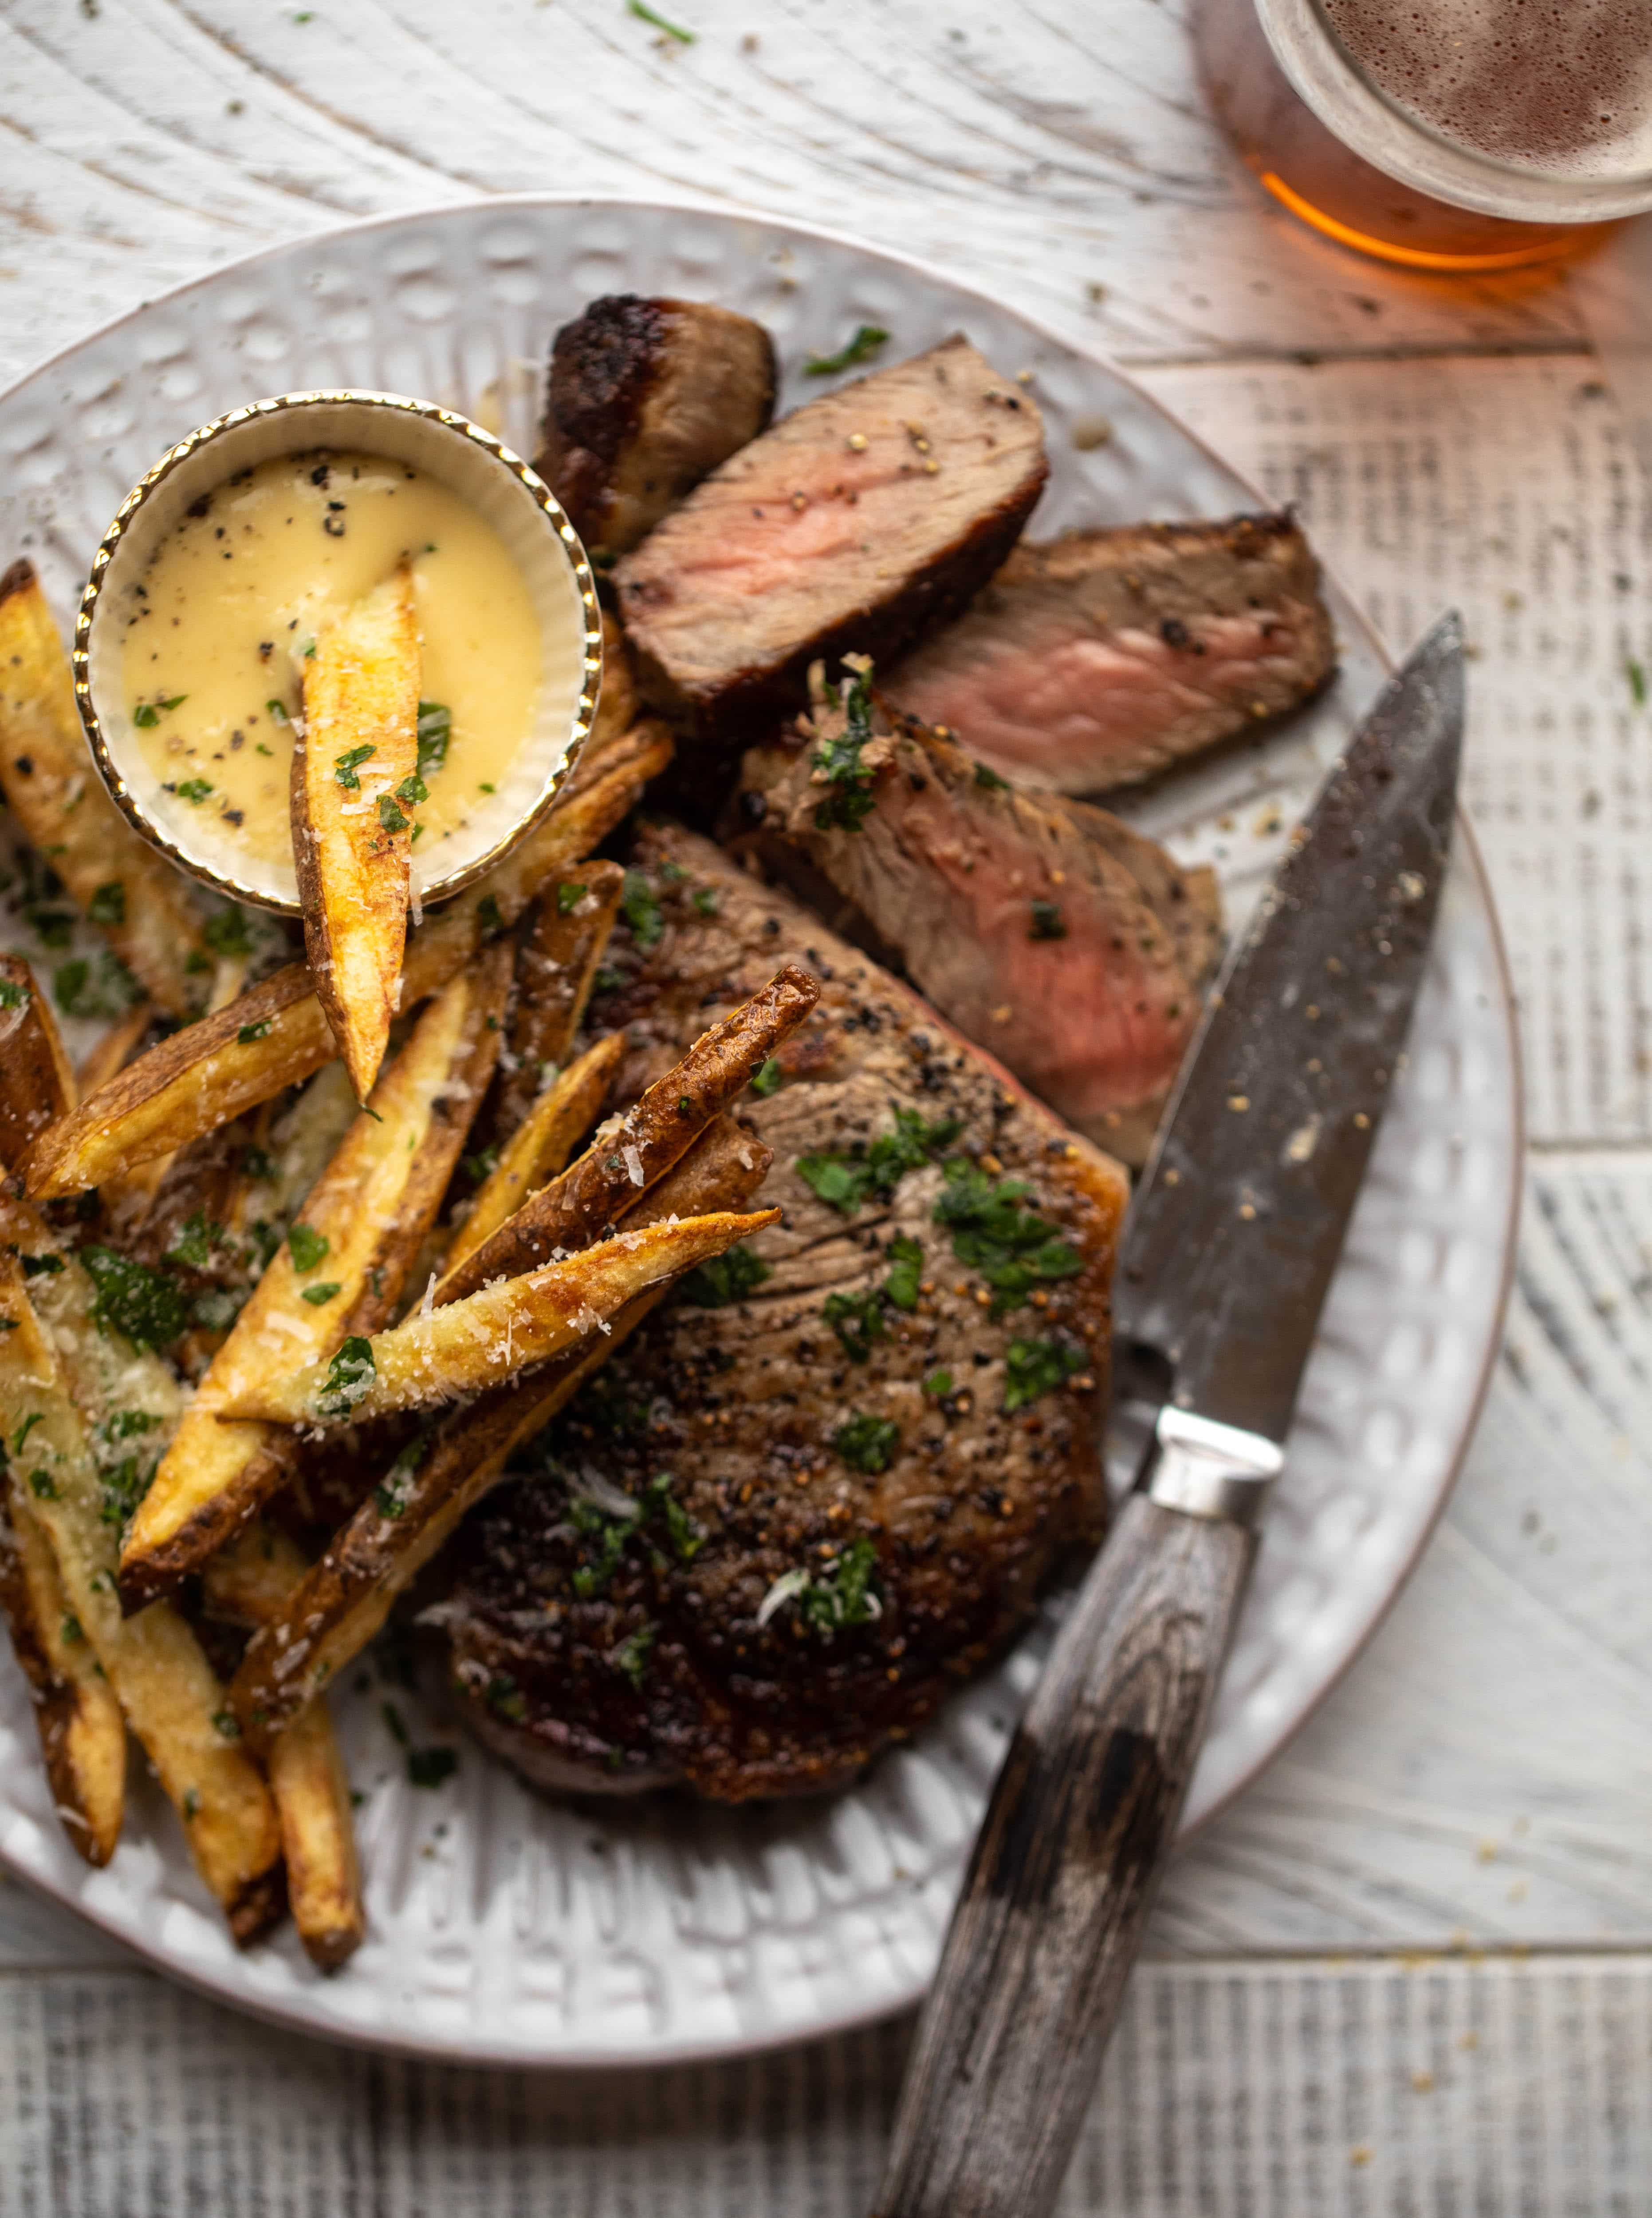 This is our favorite steak frites! Seared skillet steak and crispy fries made in the air fryer, topped with truffle salt, parmesan and herbs!